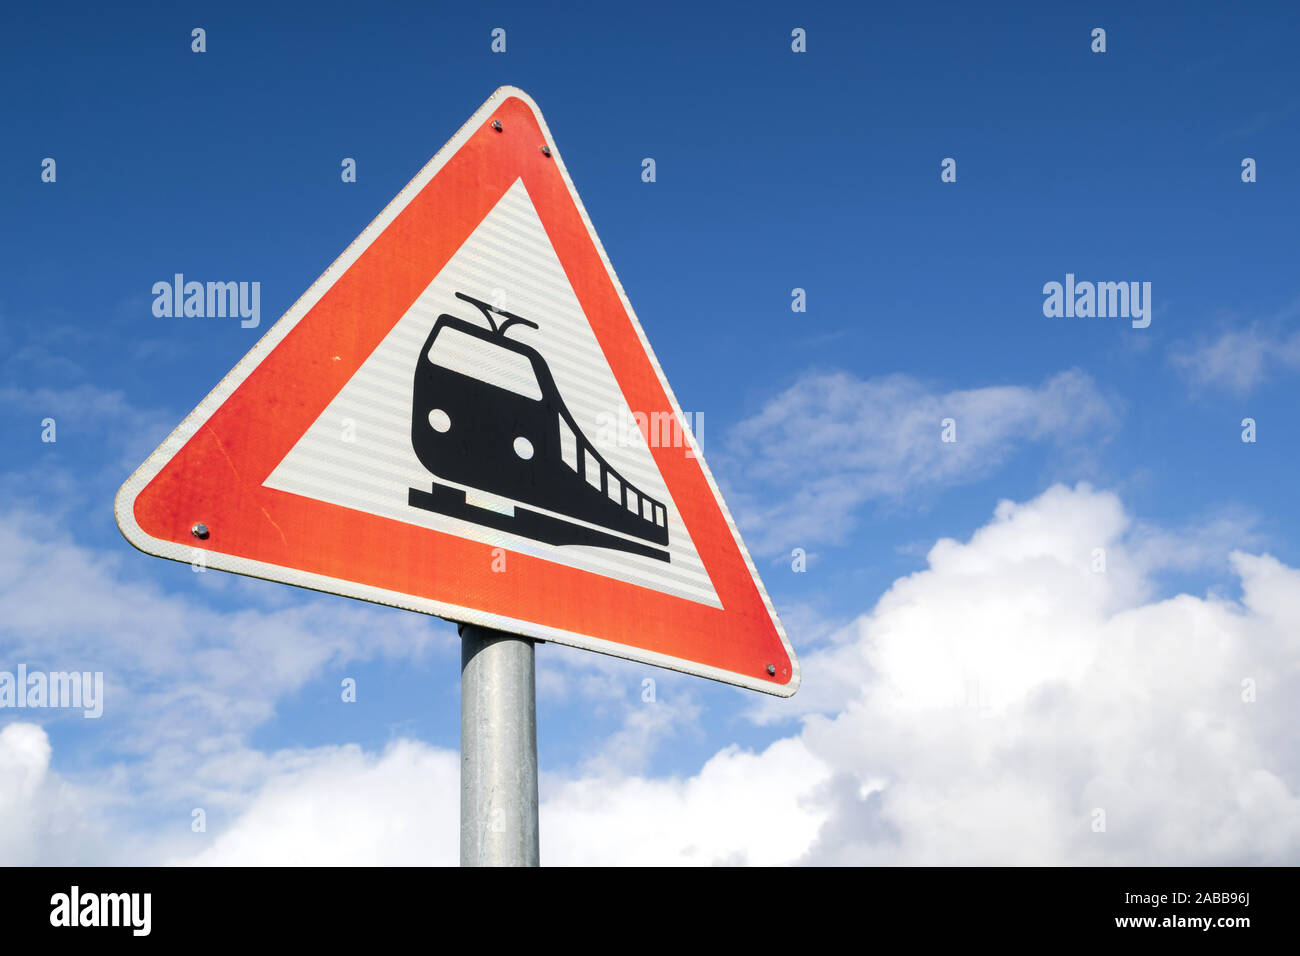 Unguarded Railway Crossing Sign High Resolution Stock Photography And Images Alamy